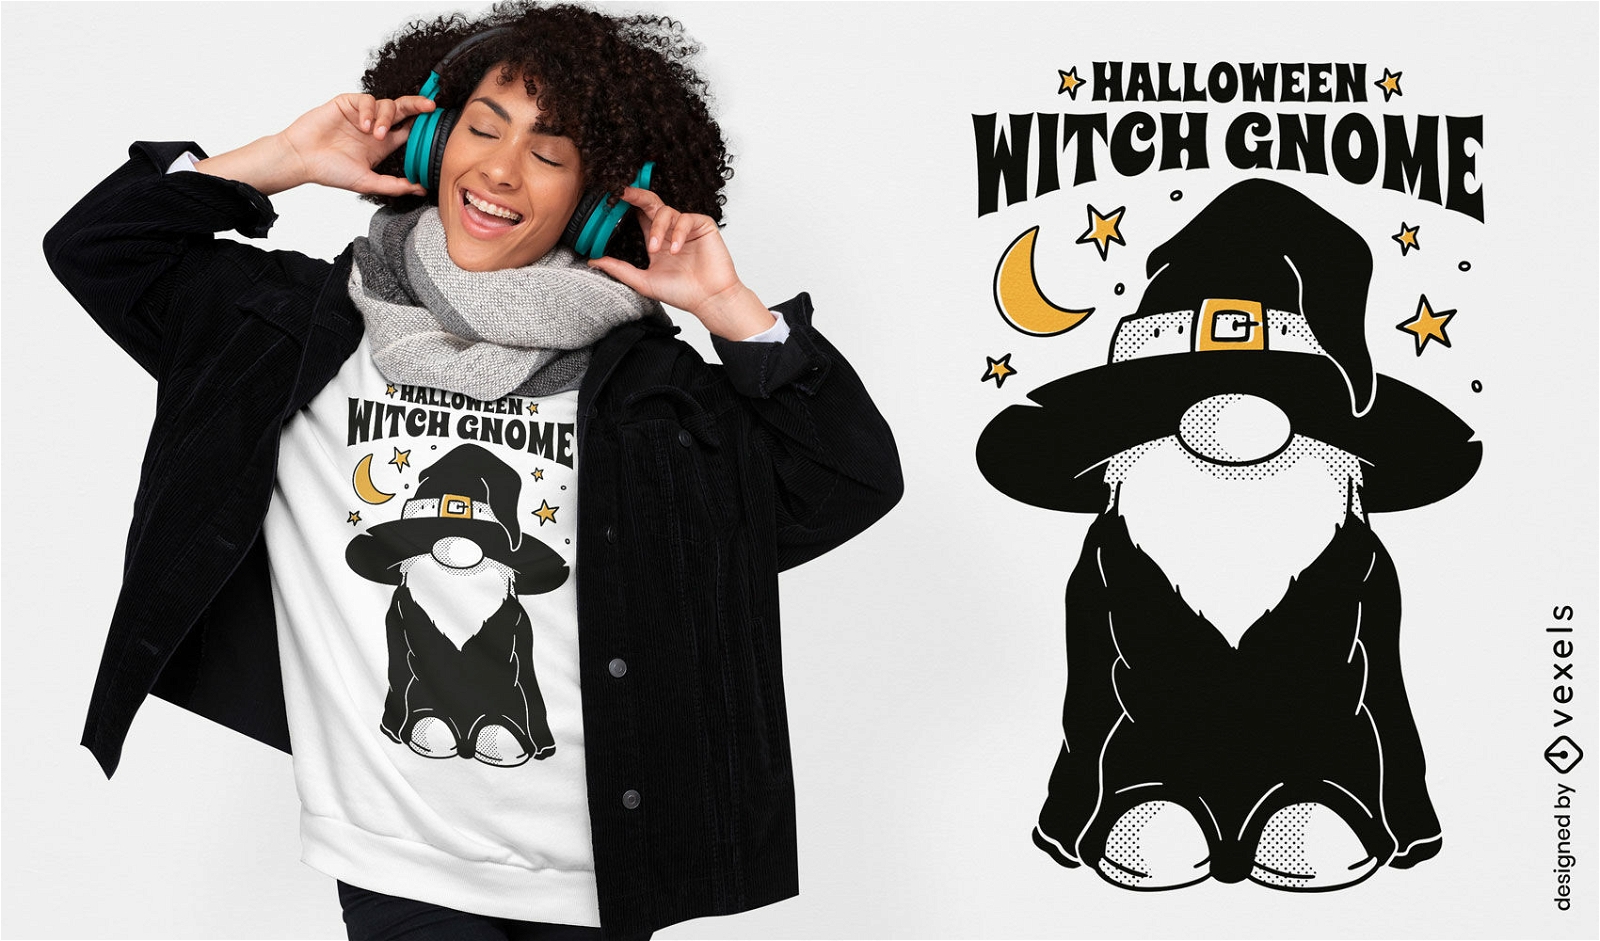 Witch gnome Halloween t-shirt design